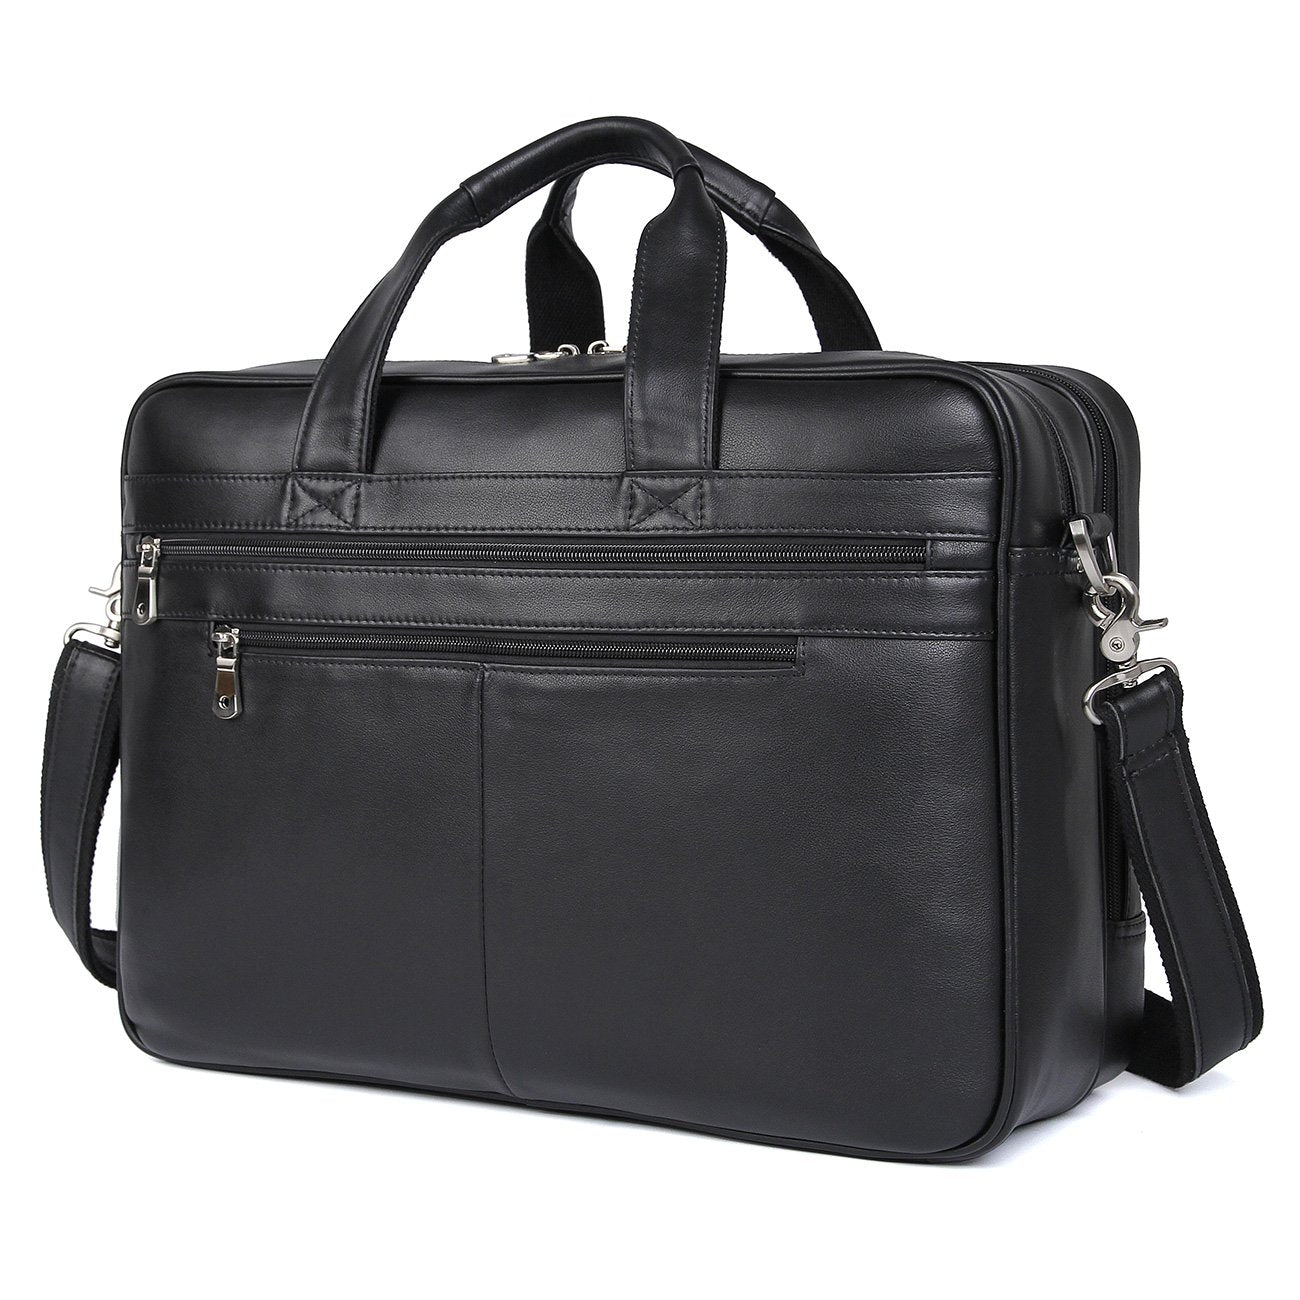 Polare 17" Real Italian Leather Laptop Case Professional Briefcase Business Bag (Black)